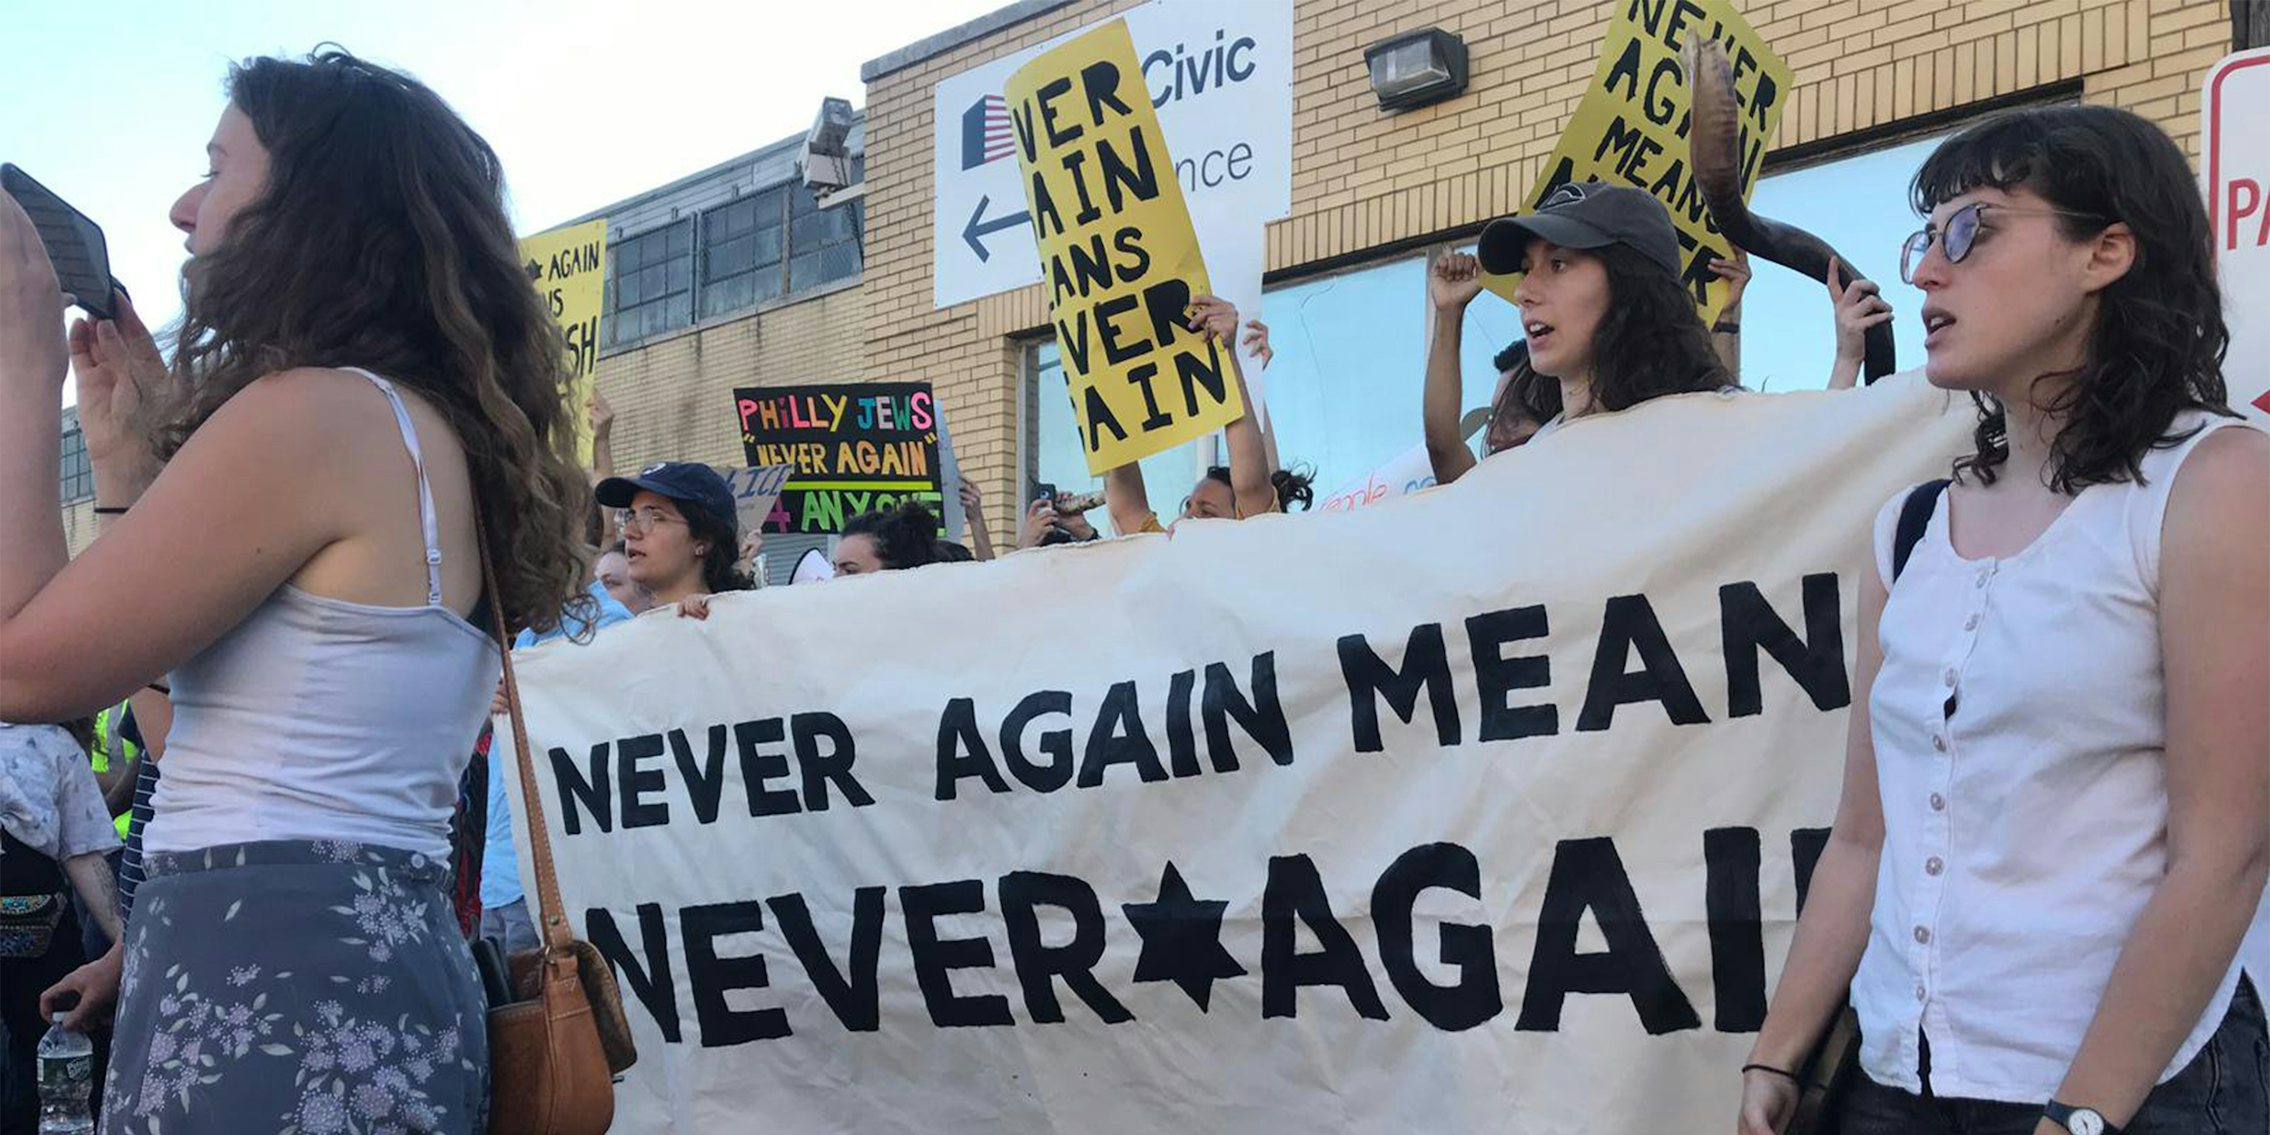 'never again means never again' banner held at ICE protest